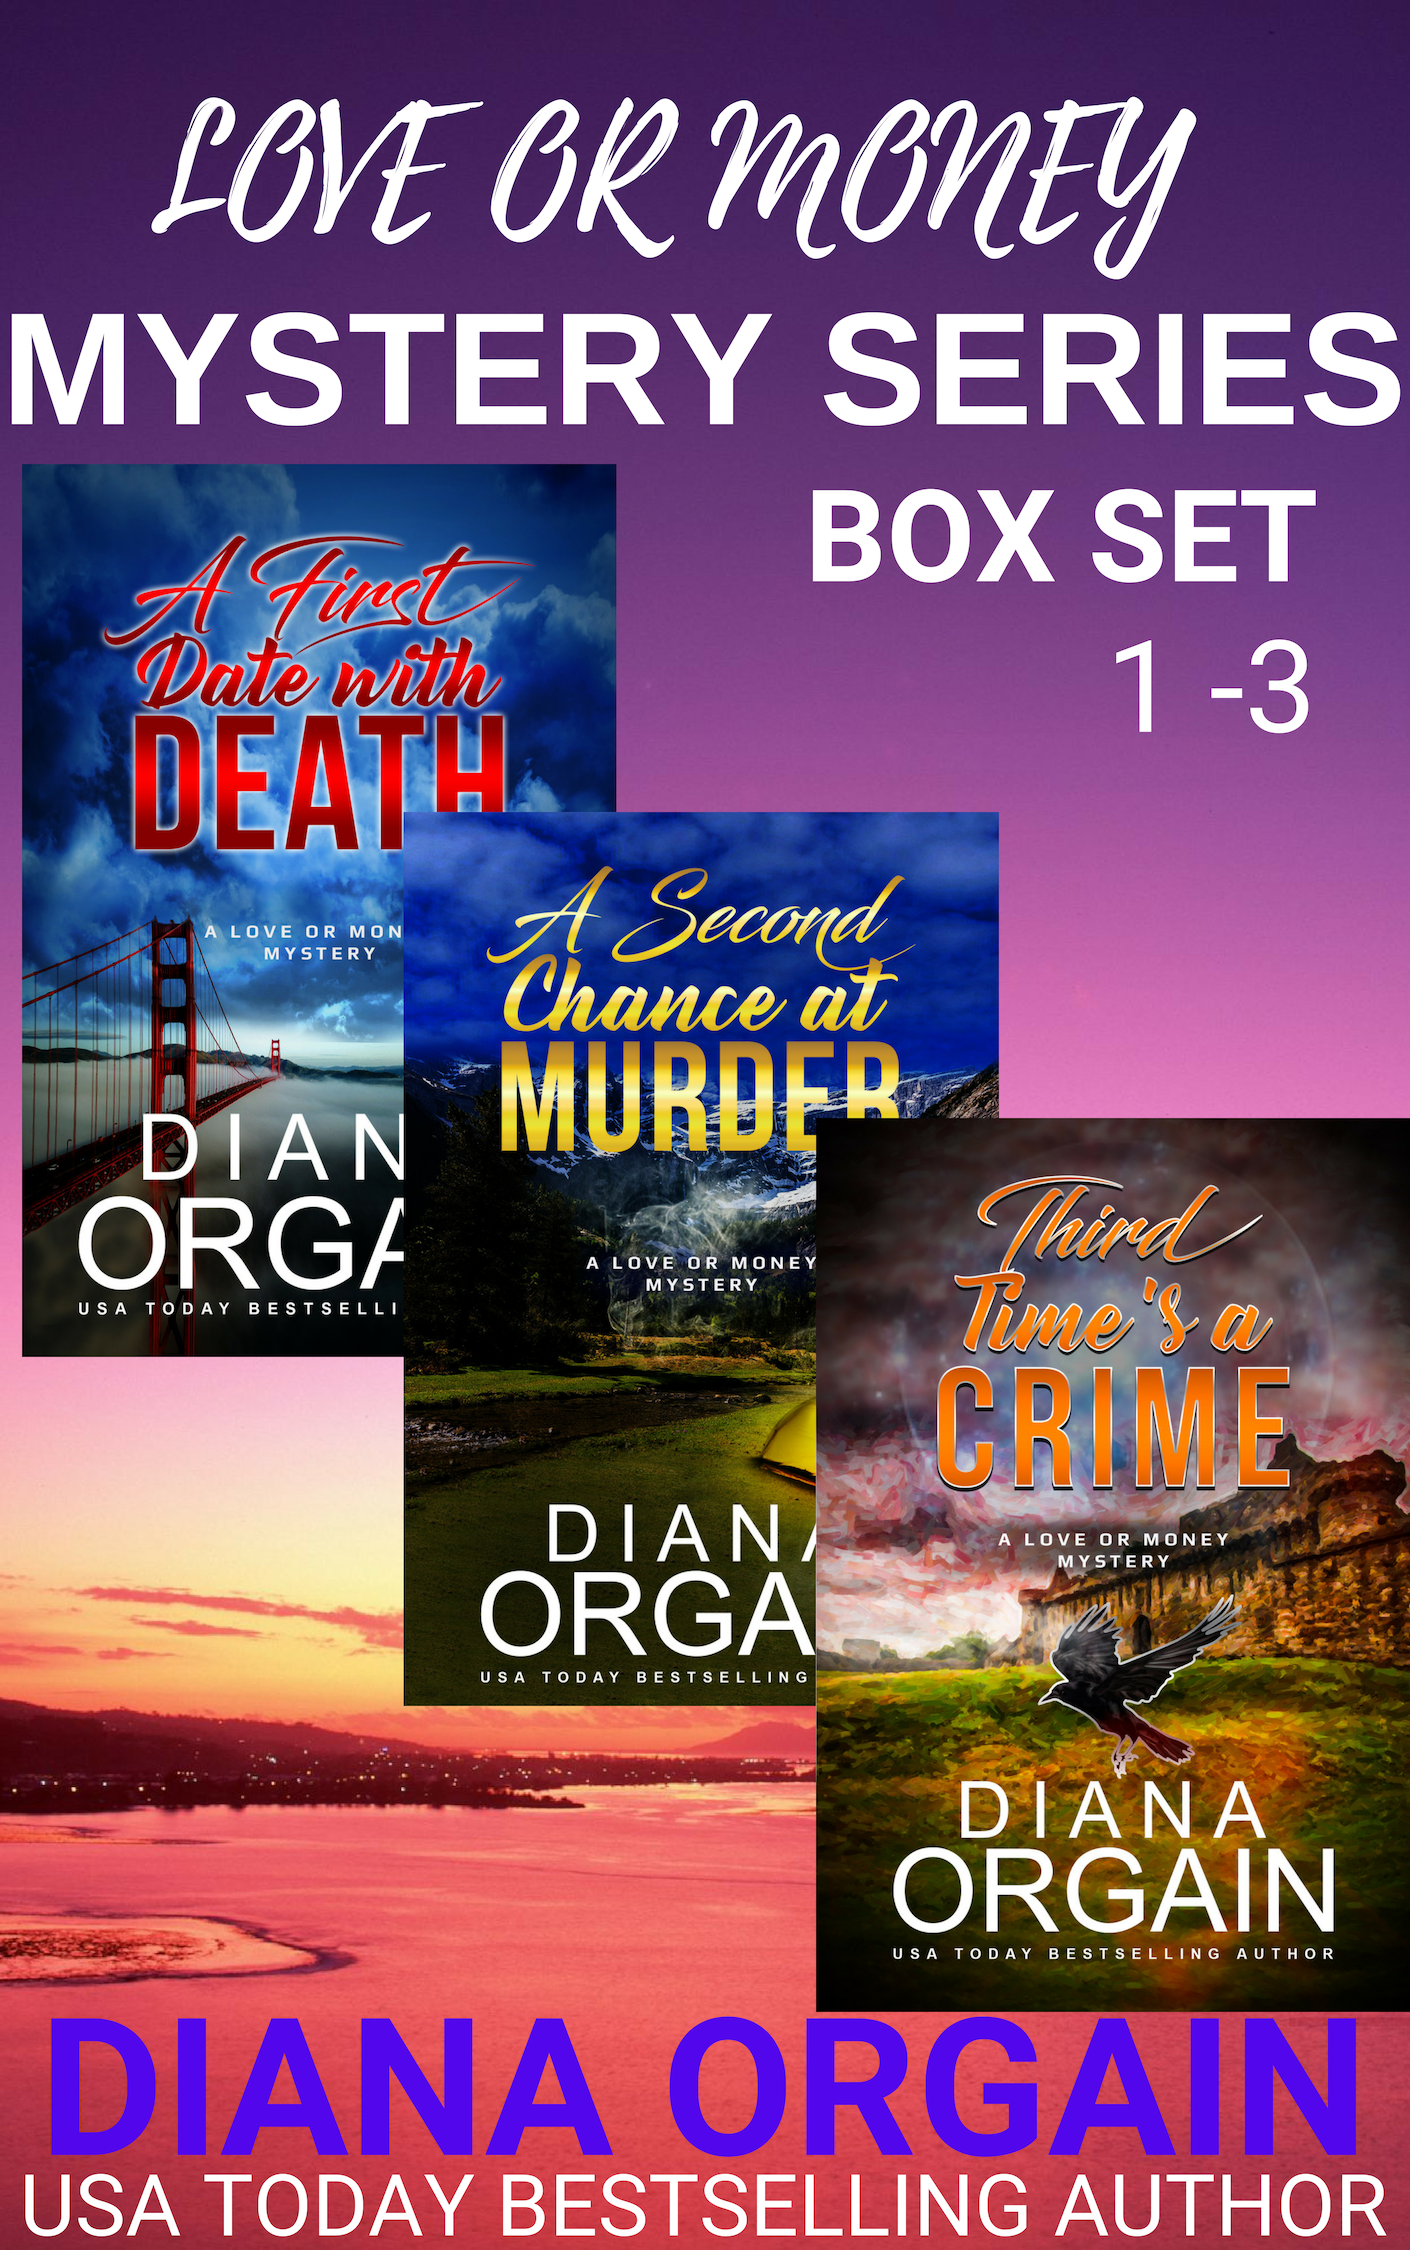 The Love or Money Mystery Series Box Set - Diana Orgain